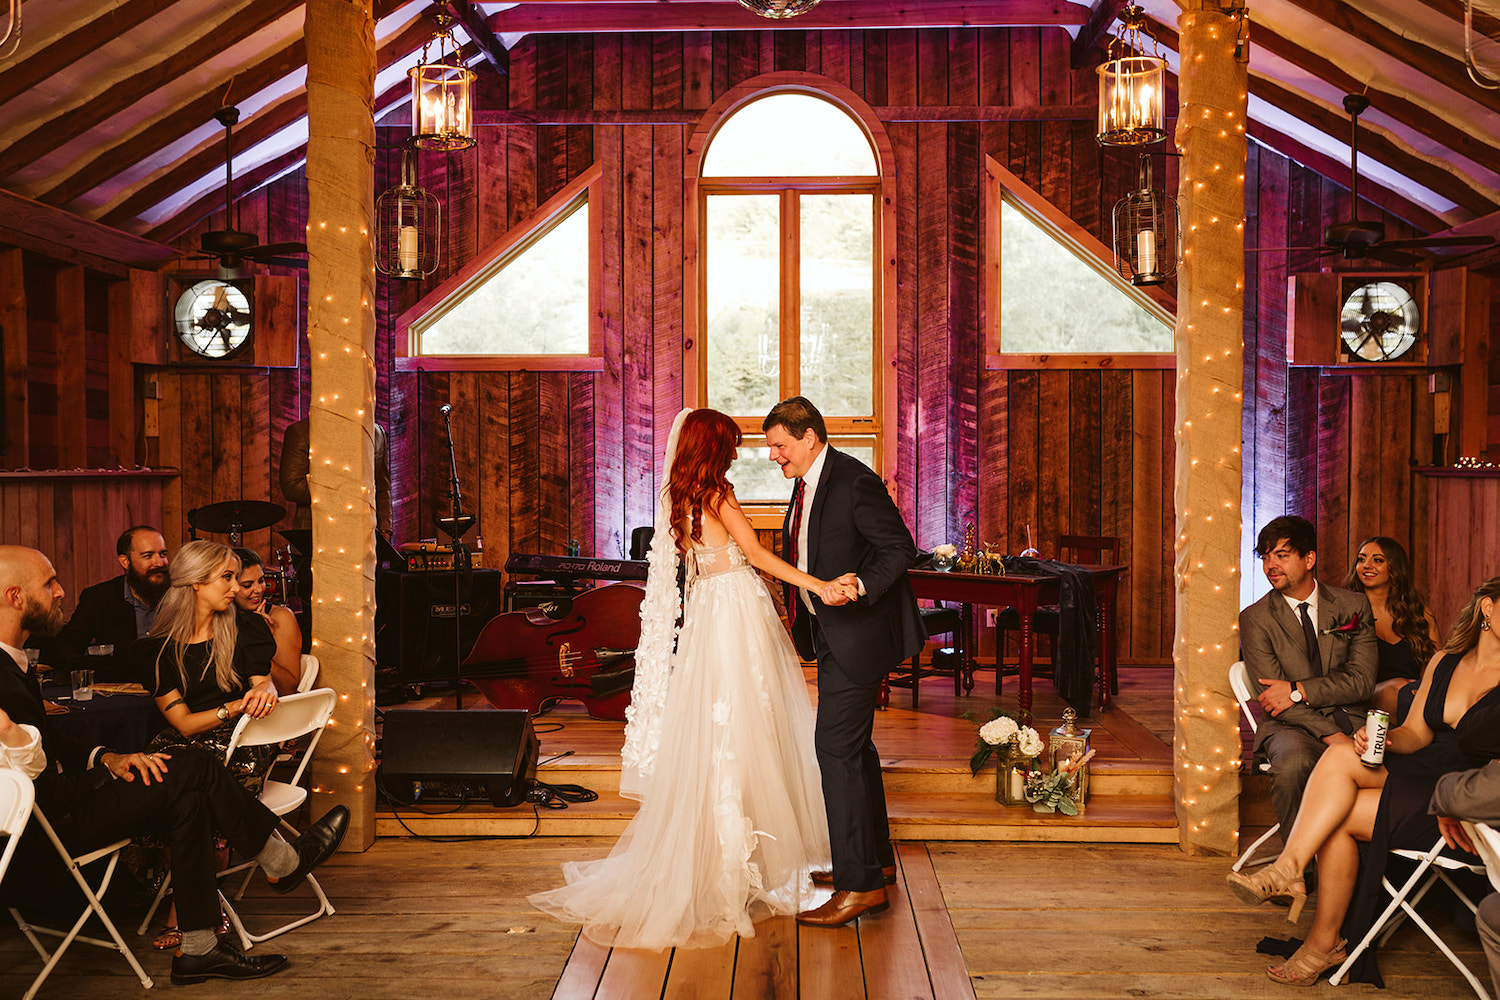 bride and her father dance under exposed beams and rafters while wedding guests watch